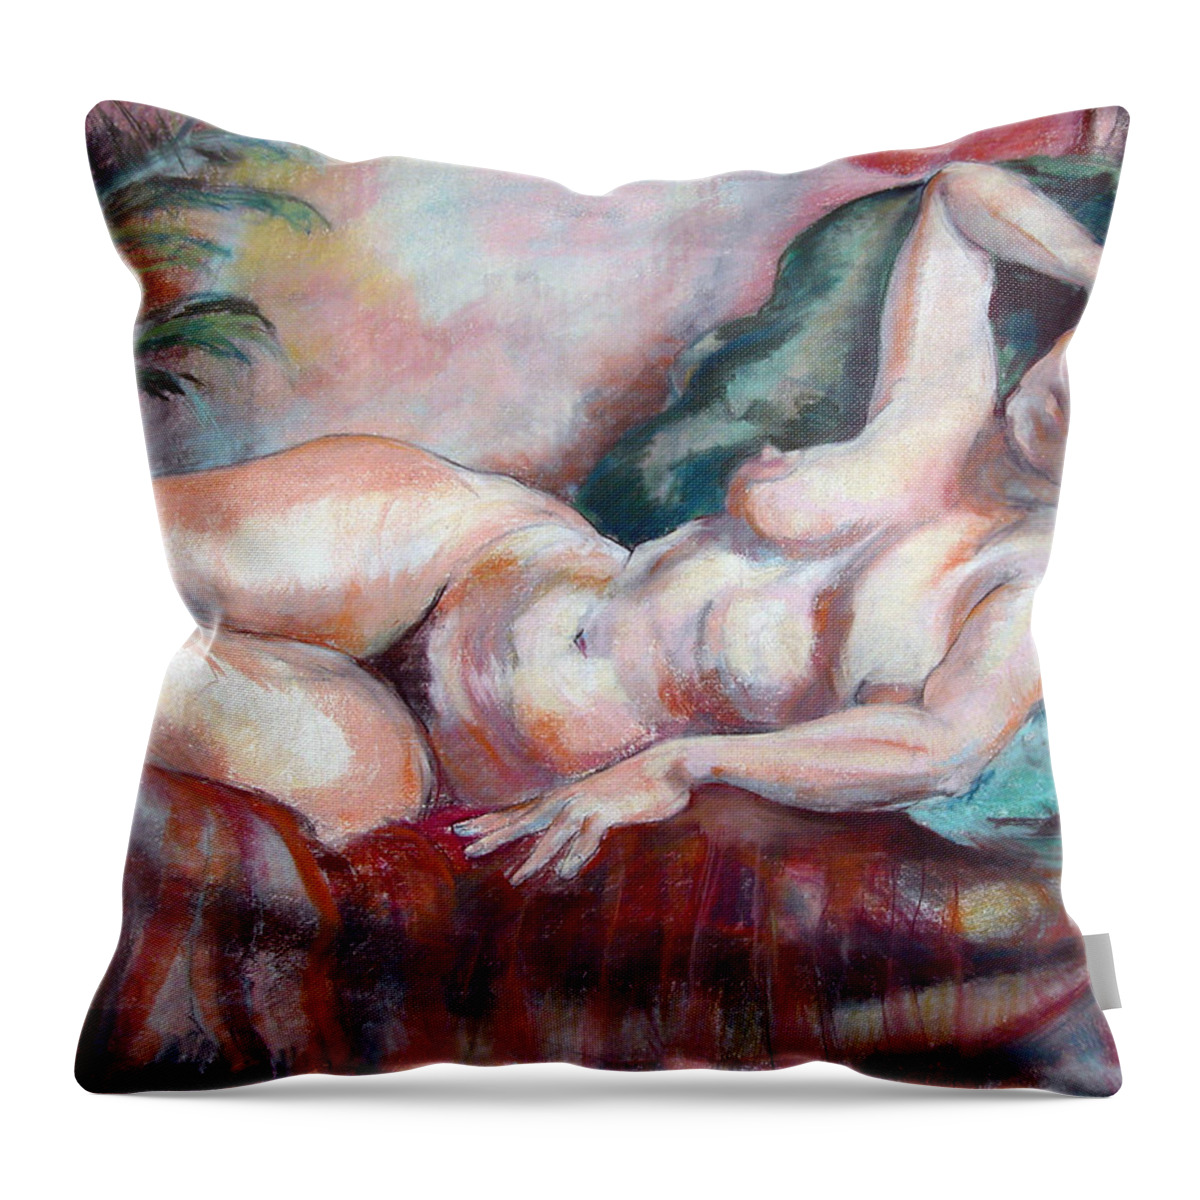 Nude Throw Pillow featuring the painting Reclining Nude by Synnove Pettersen